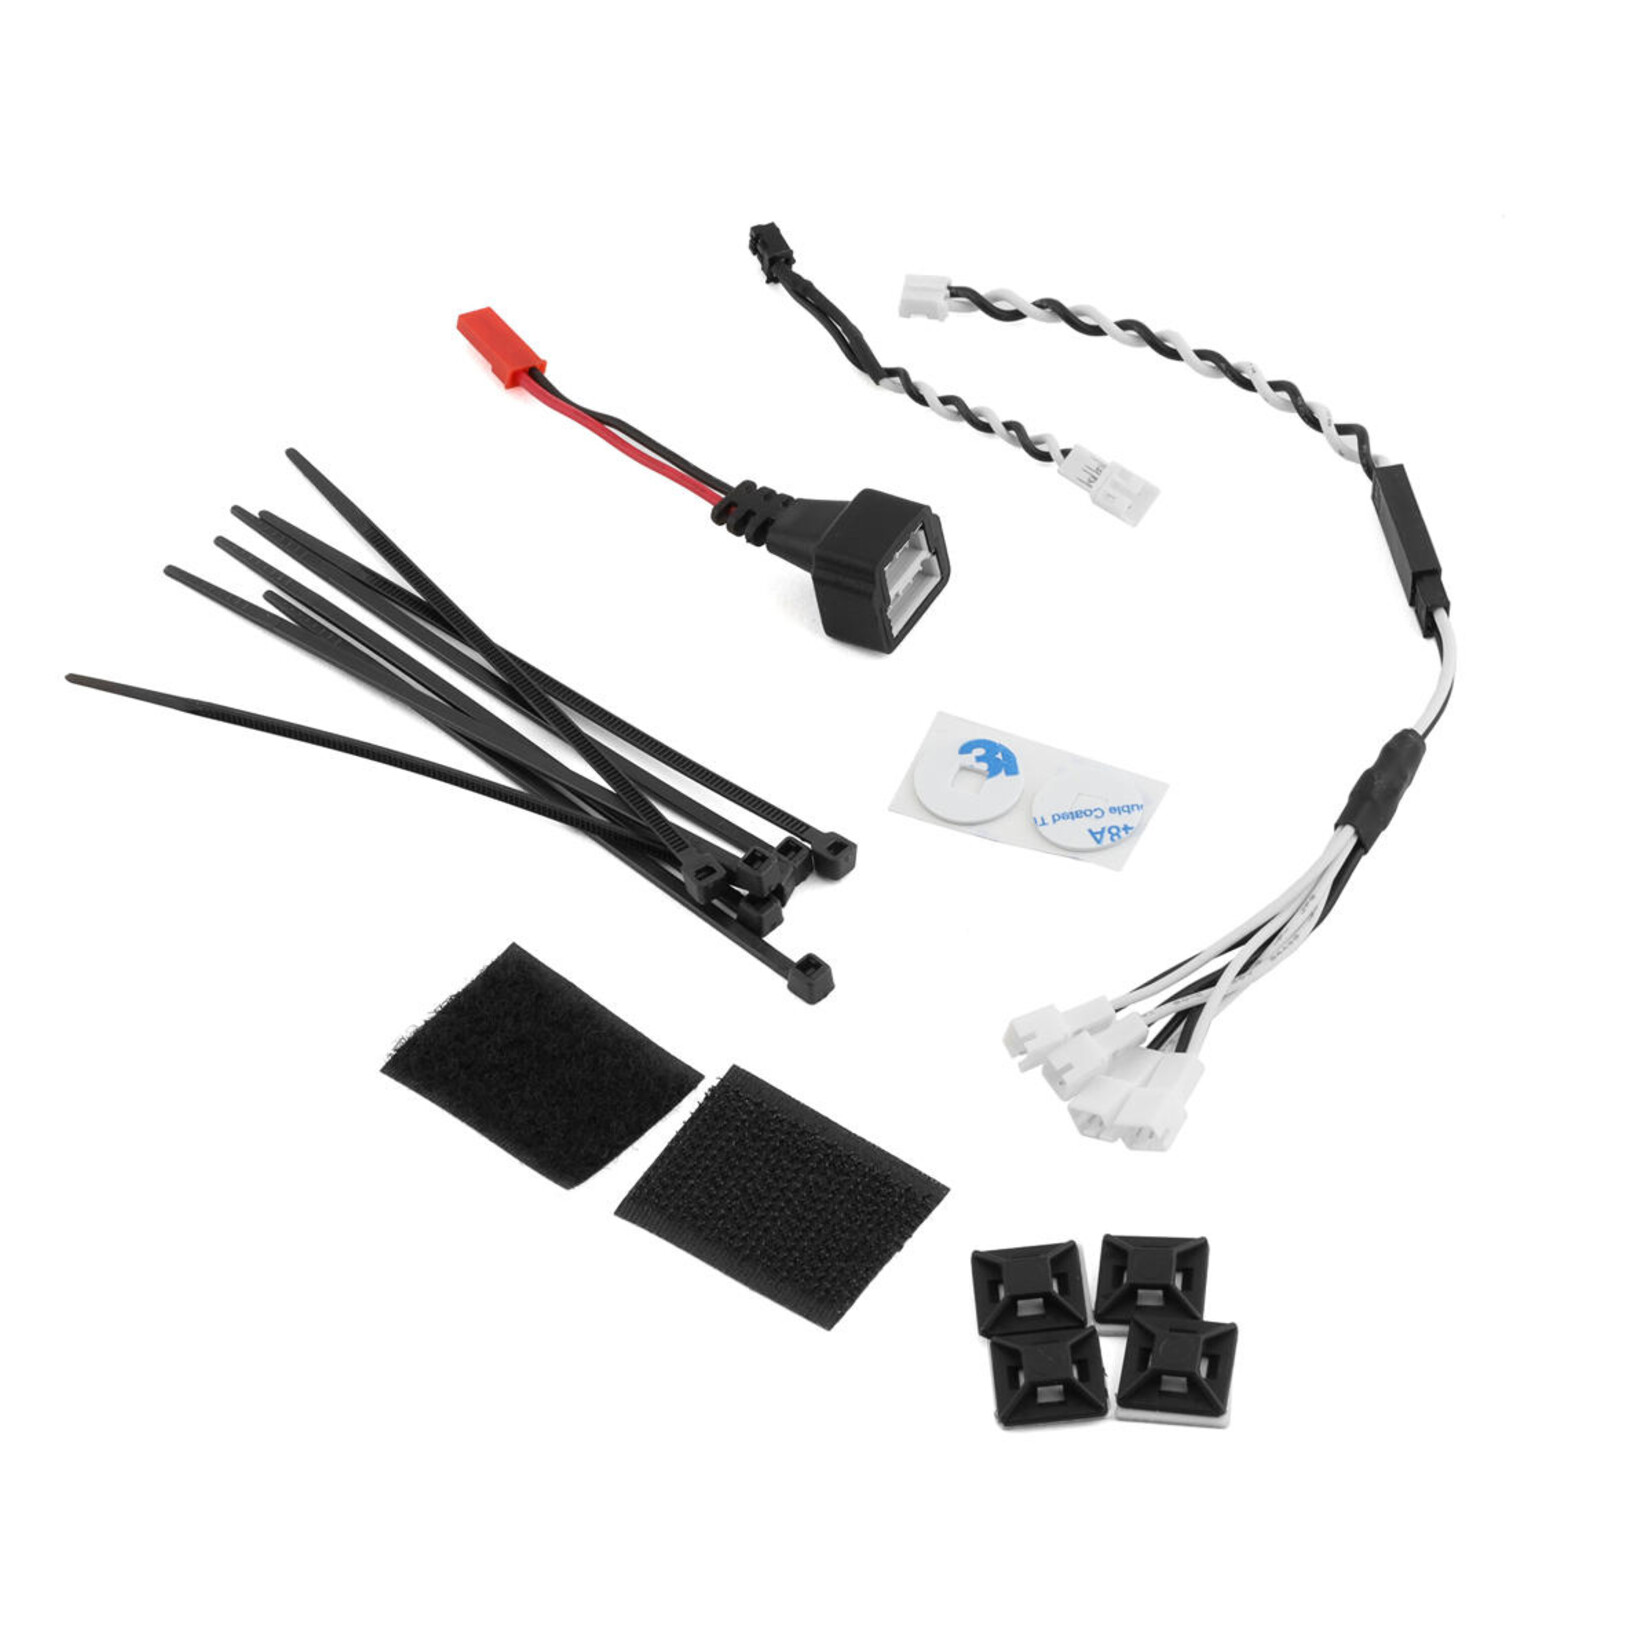 MyTrickRC MyTrickRC Axial SCX10 III AXI03003T1/AXI03007 LED Lights Kit w/HB-2 Controller #MYK-AX07HB